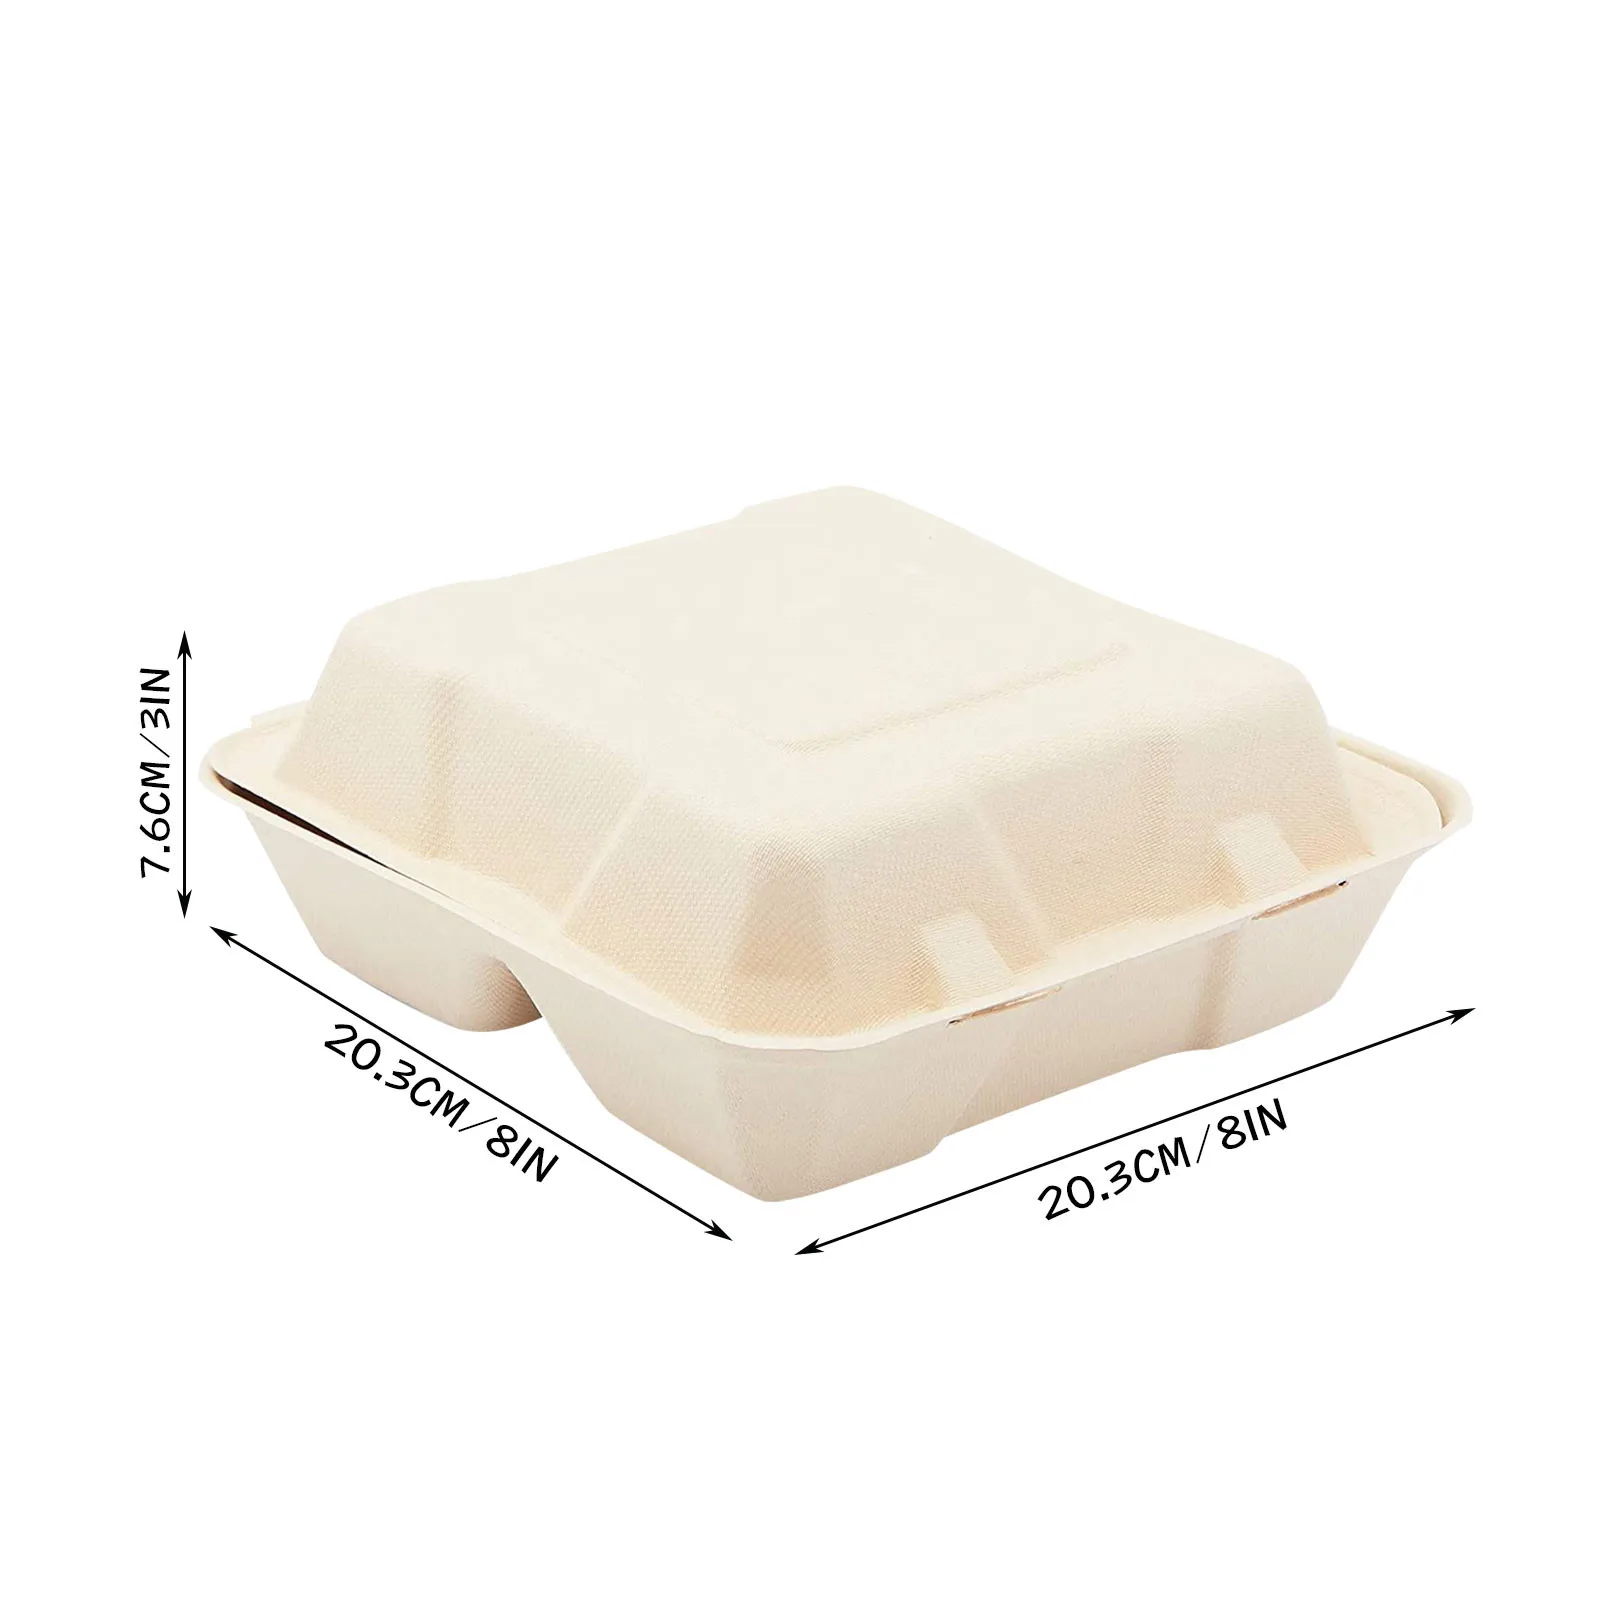 https://ae01.alicdn.com/kf/S40c3aea89bcc480280919bd2664d9aede/50PCS-Disposable-Biodegradable-8-Inch-Hamburger-Box-Bento-Lunch-Box-Baking-Cak-Food-Containers-Dessert-Protection.jpg